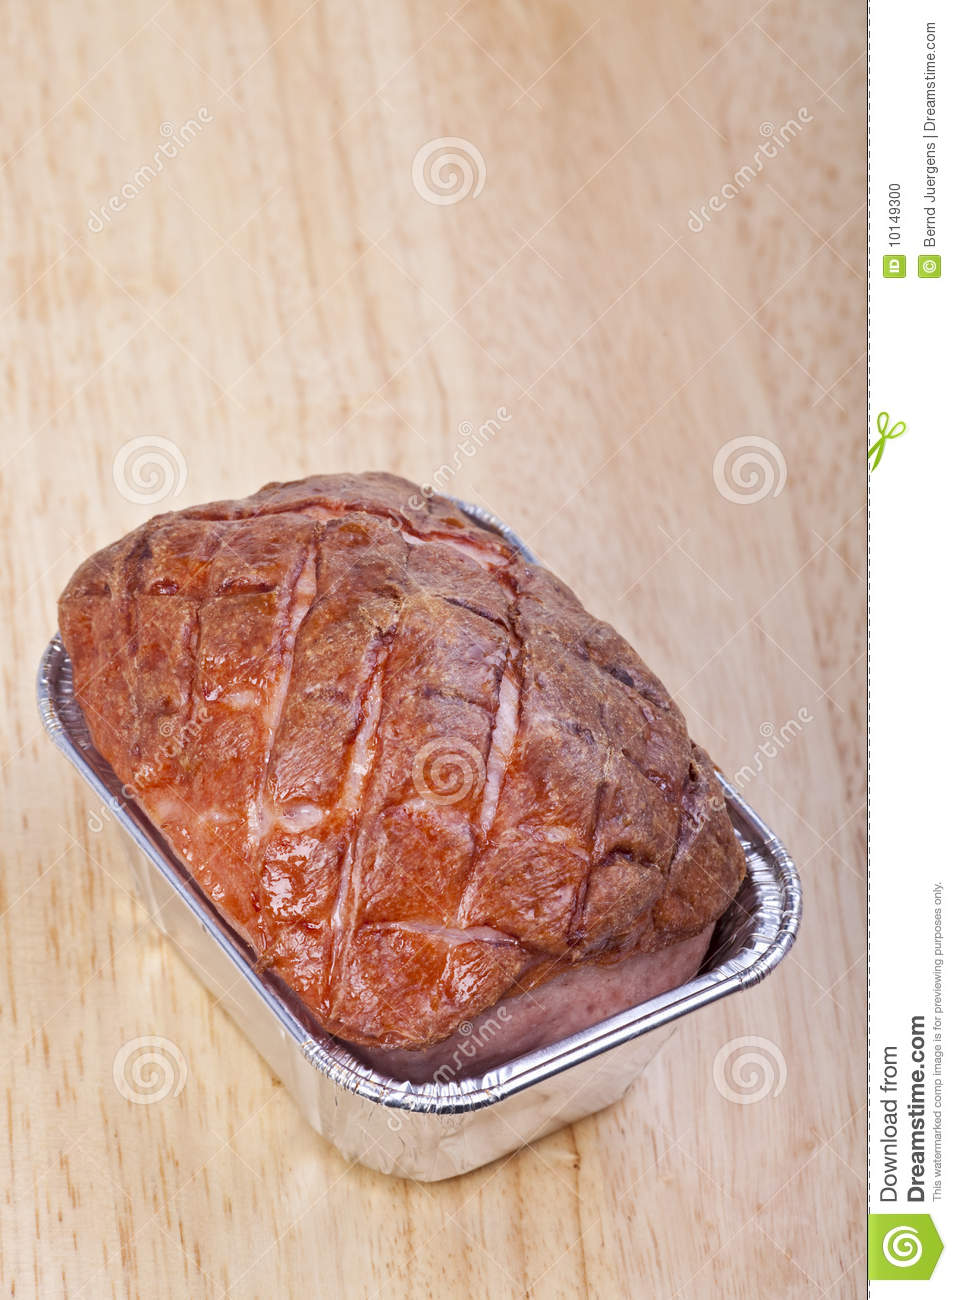 Meat Loaf Stock Photo   Image  10149300